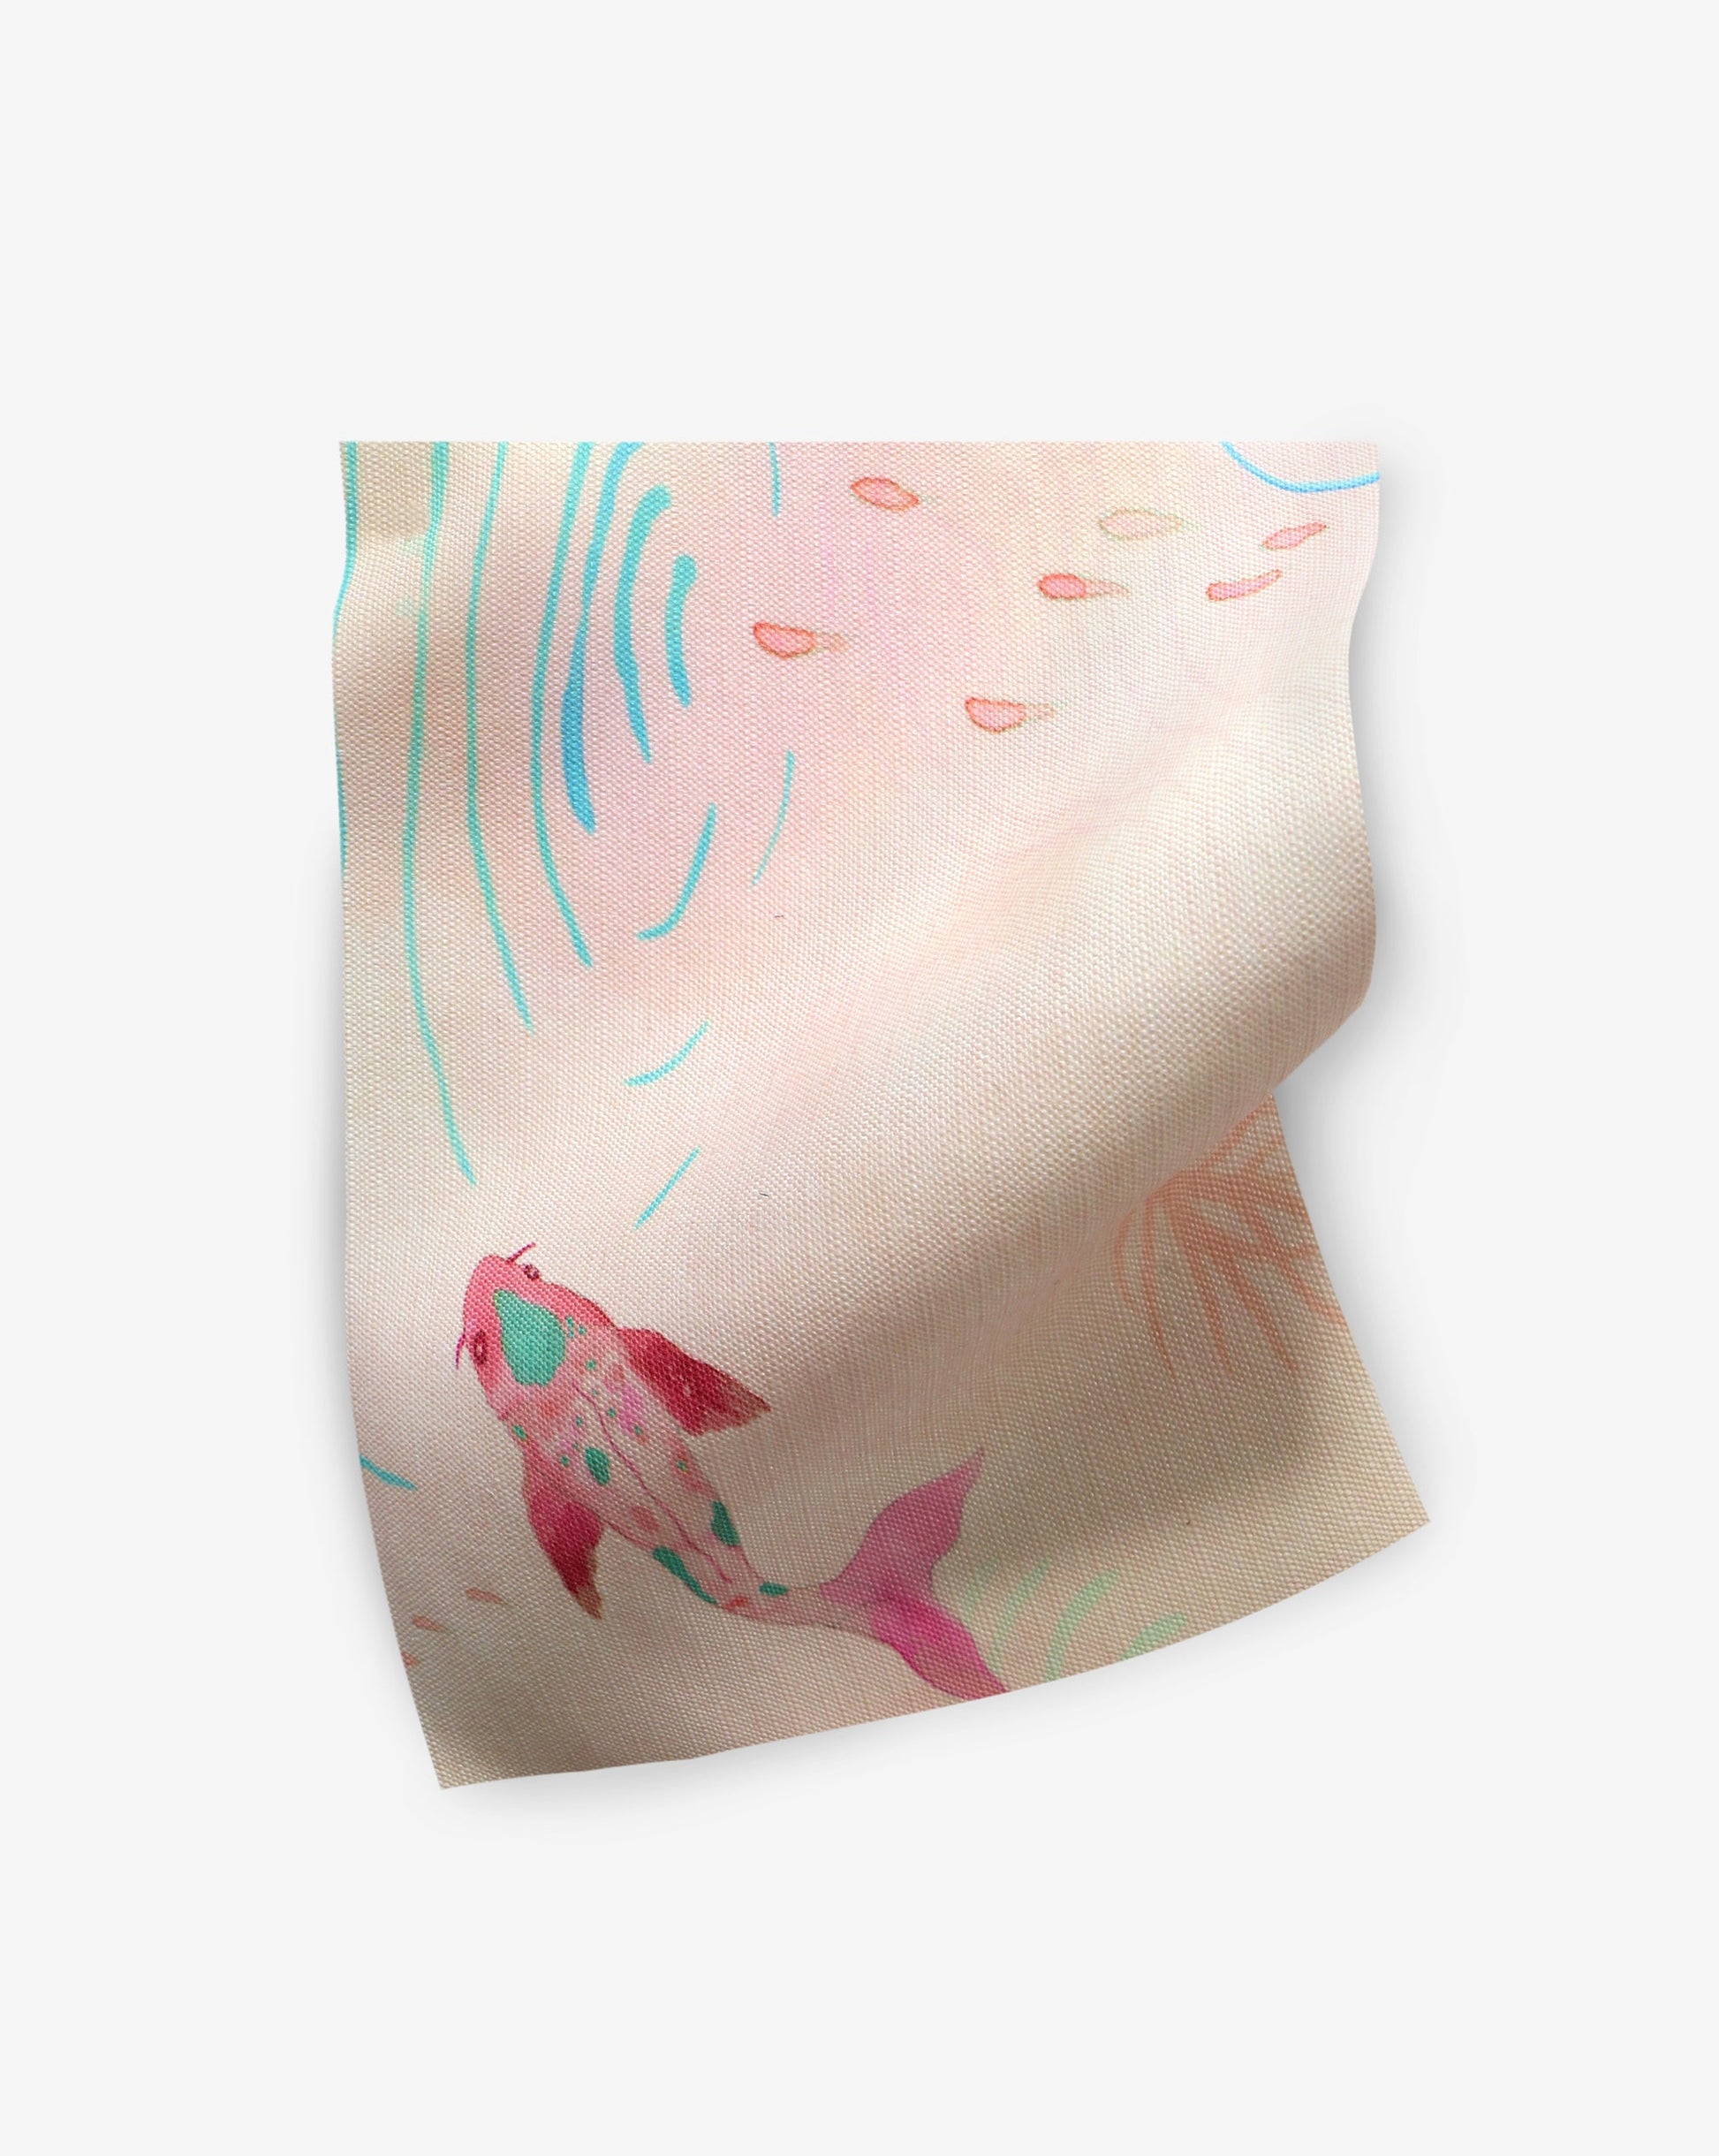 A luxurious hand fabric featuring the Water Signs Performance Fabric Multi, designed by Olivia Provey